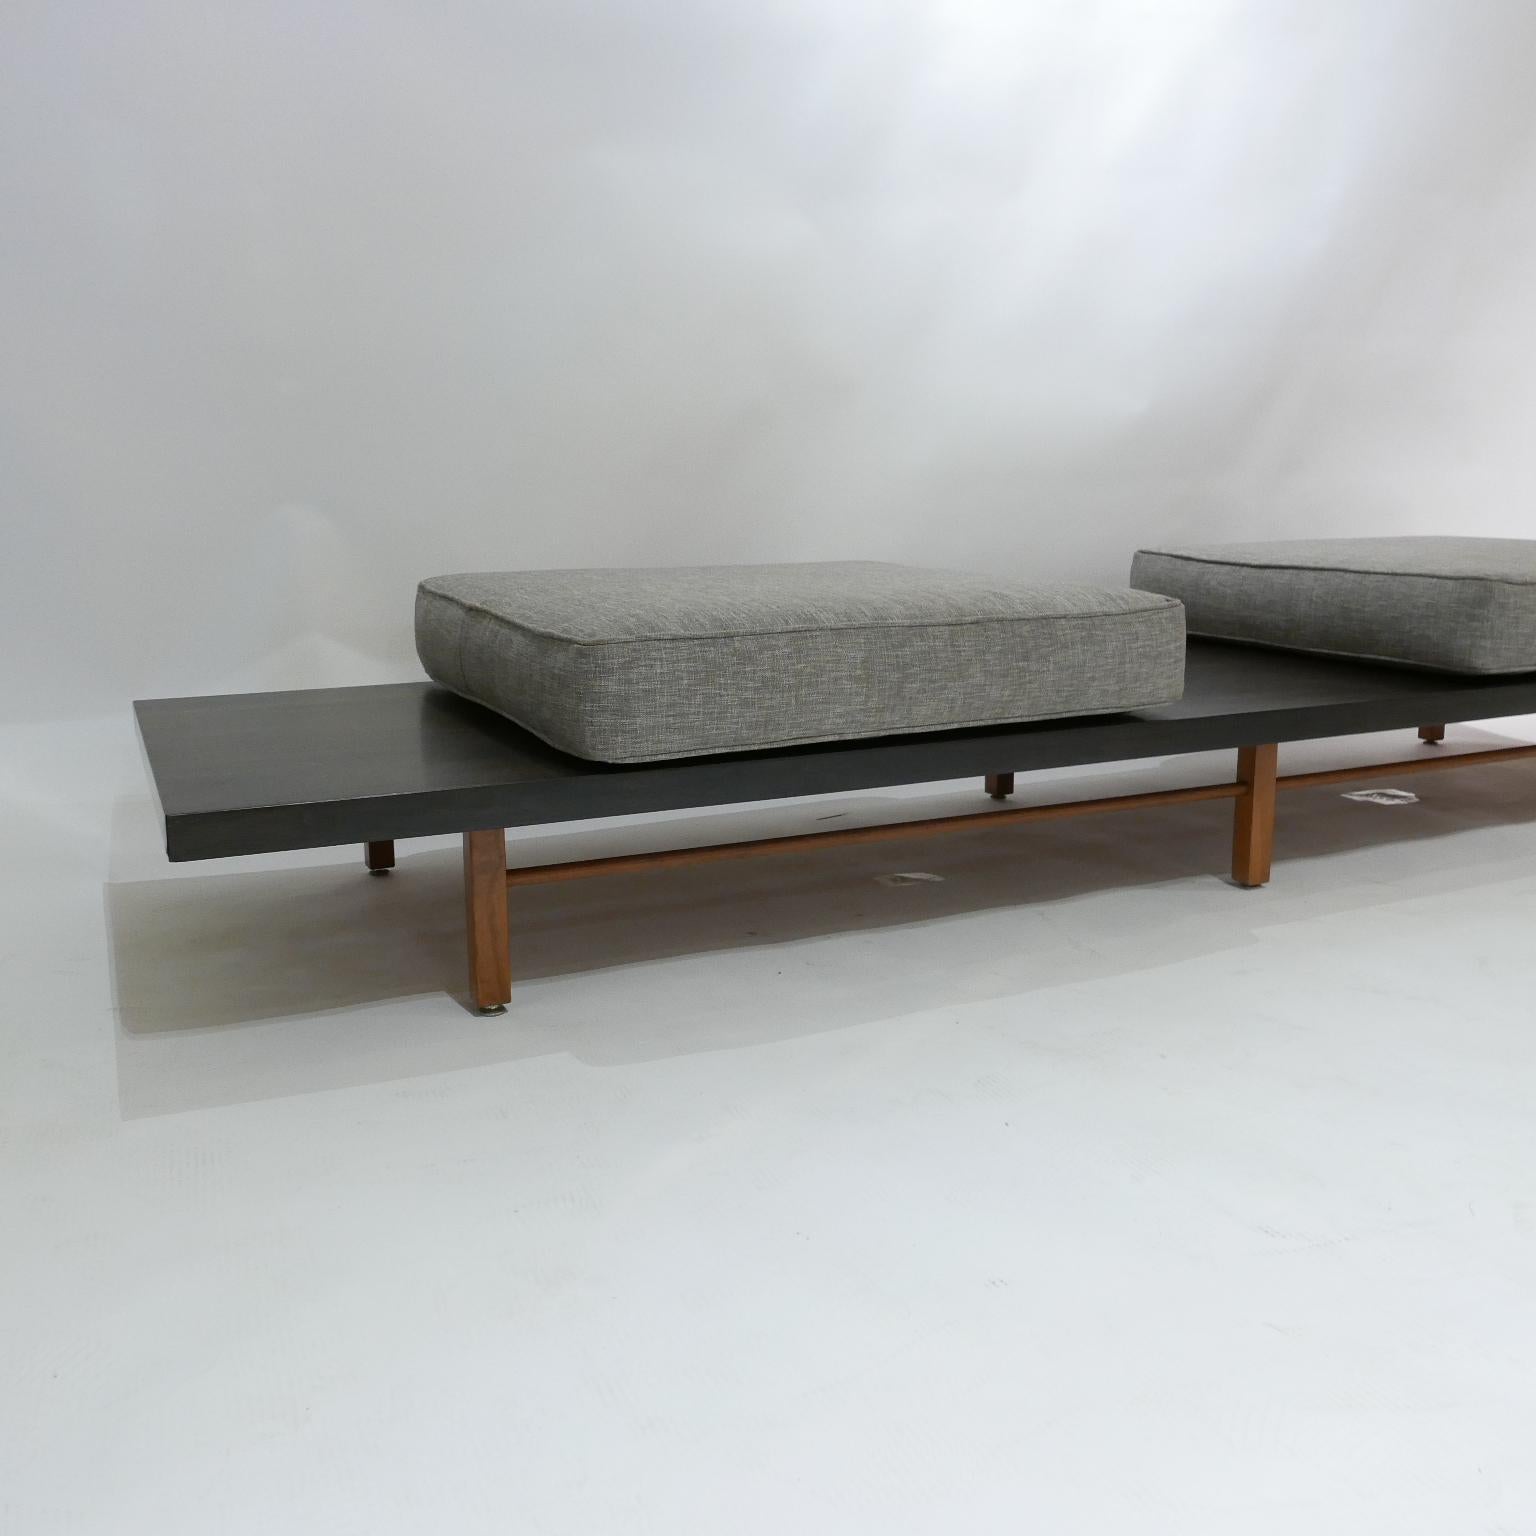 Mid-20th Century Milo Baughman for Thayer Coggin Monumental Low Table or Bench with Cushions